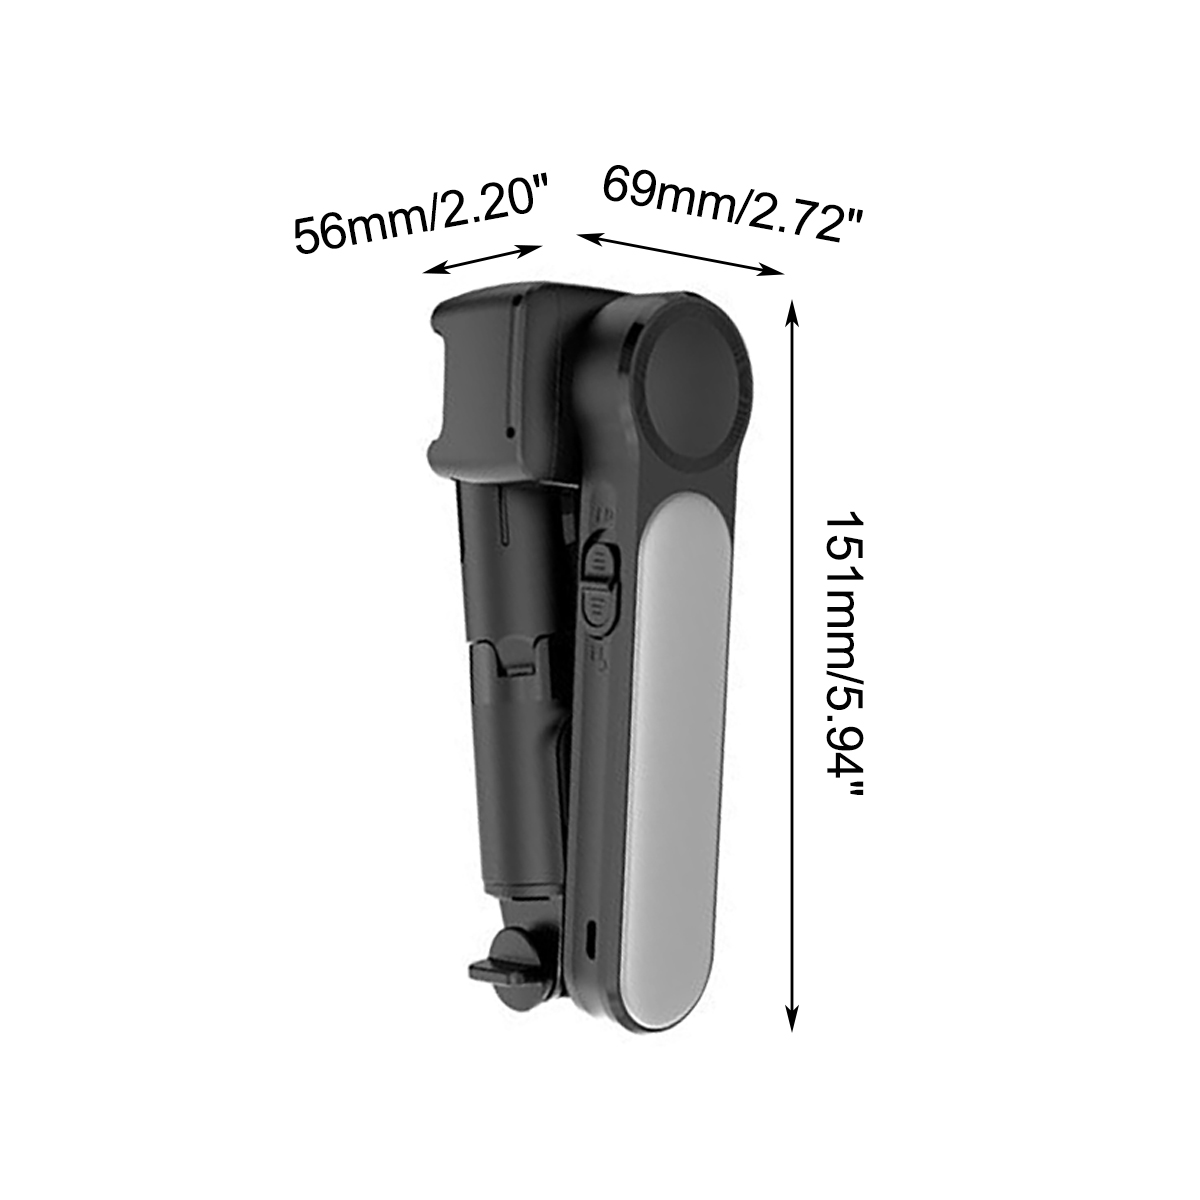 Find Wireless bluetooth Handheld Gimbal Stabilizer Selfie Stick 3 Modes 9 Brightness for Sale on Gipsybee.com with cryptocurrencies